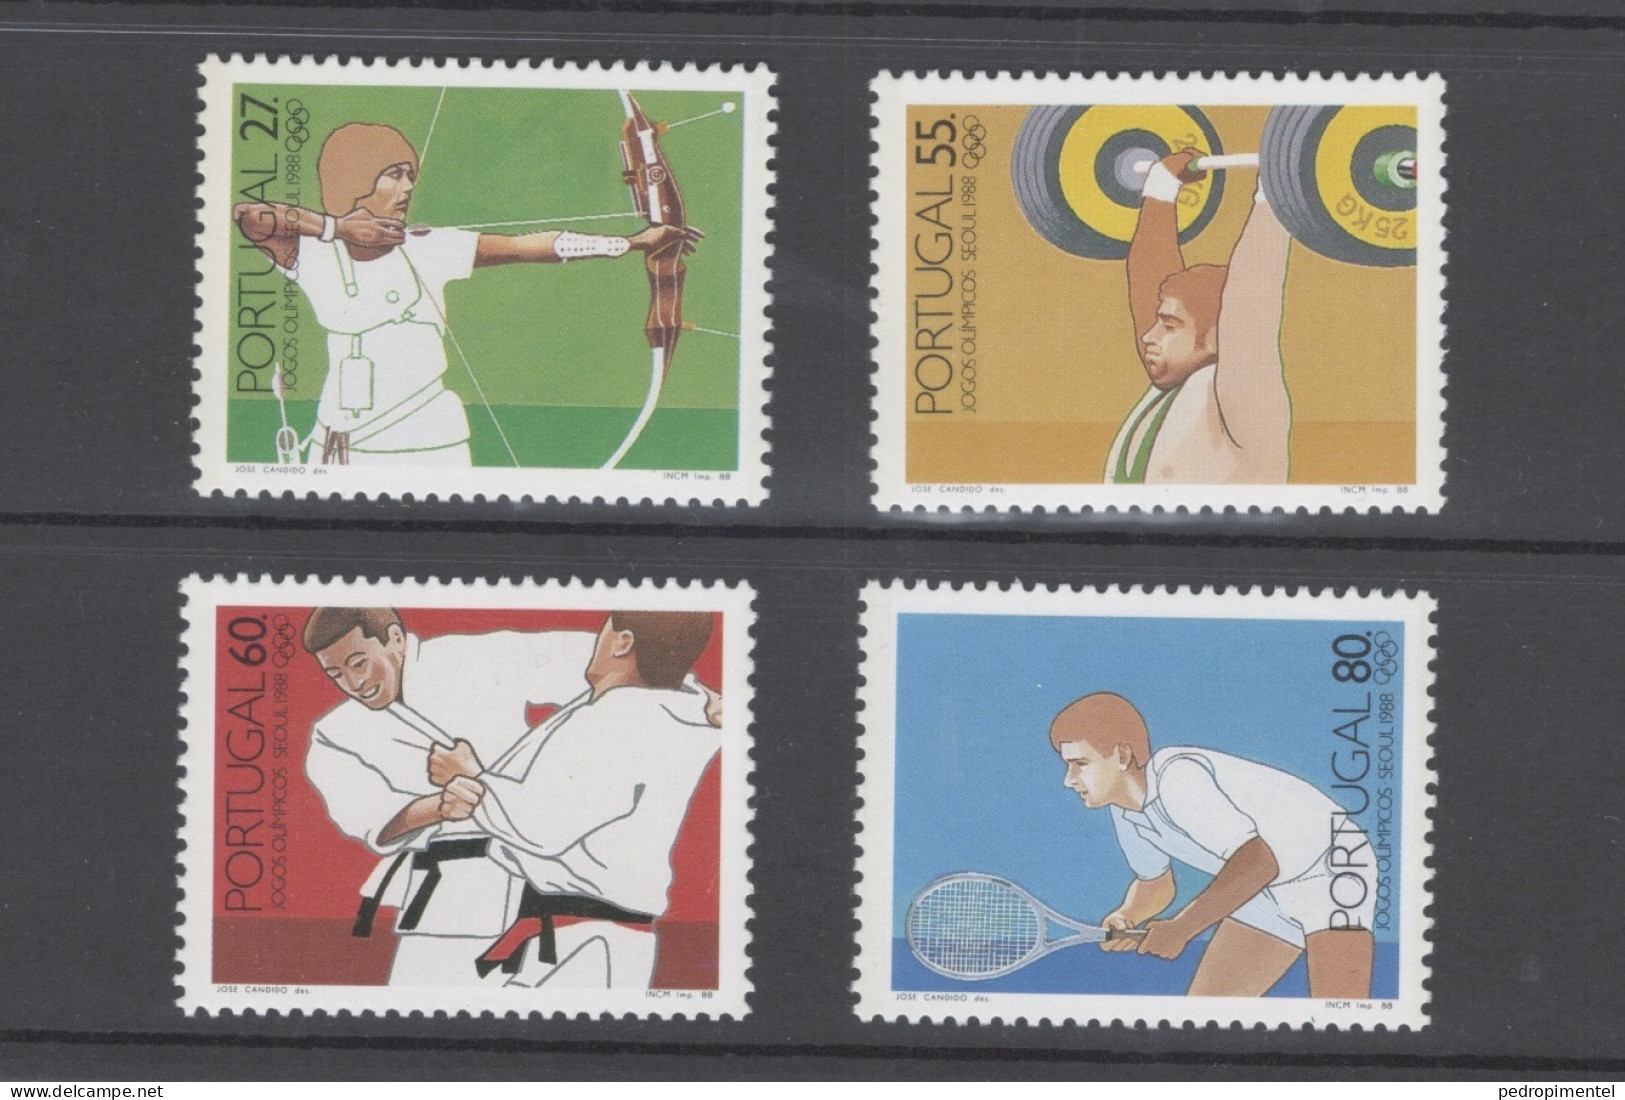 Portugal Madeira 1988 "Seoul Olympic Games" Condition MNH OG Mundifil #1854-1857 - Ungebraucht